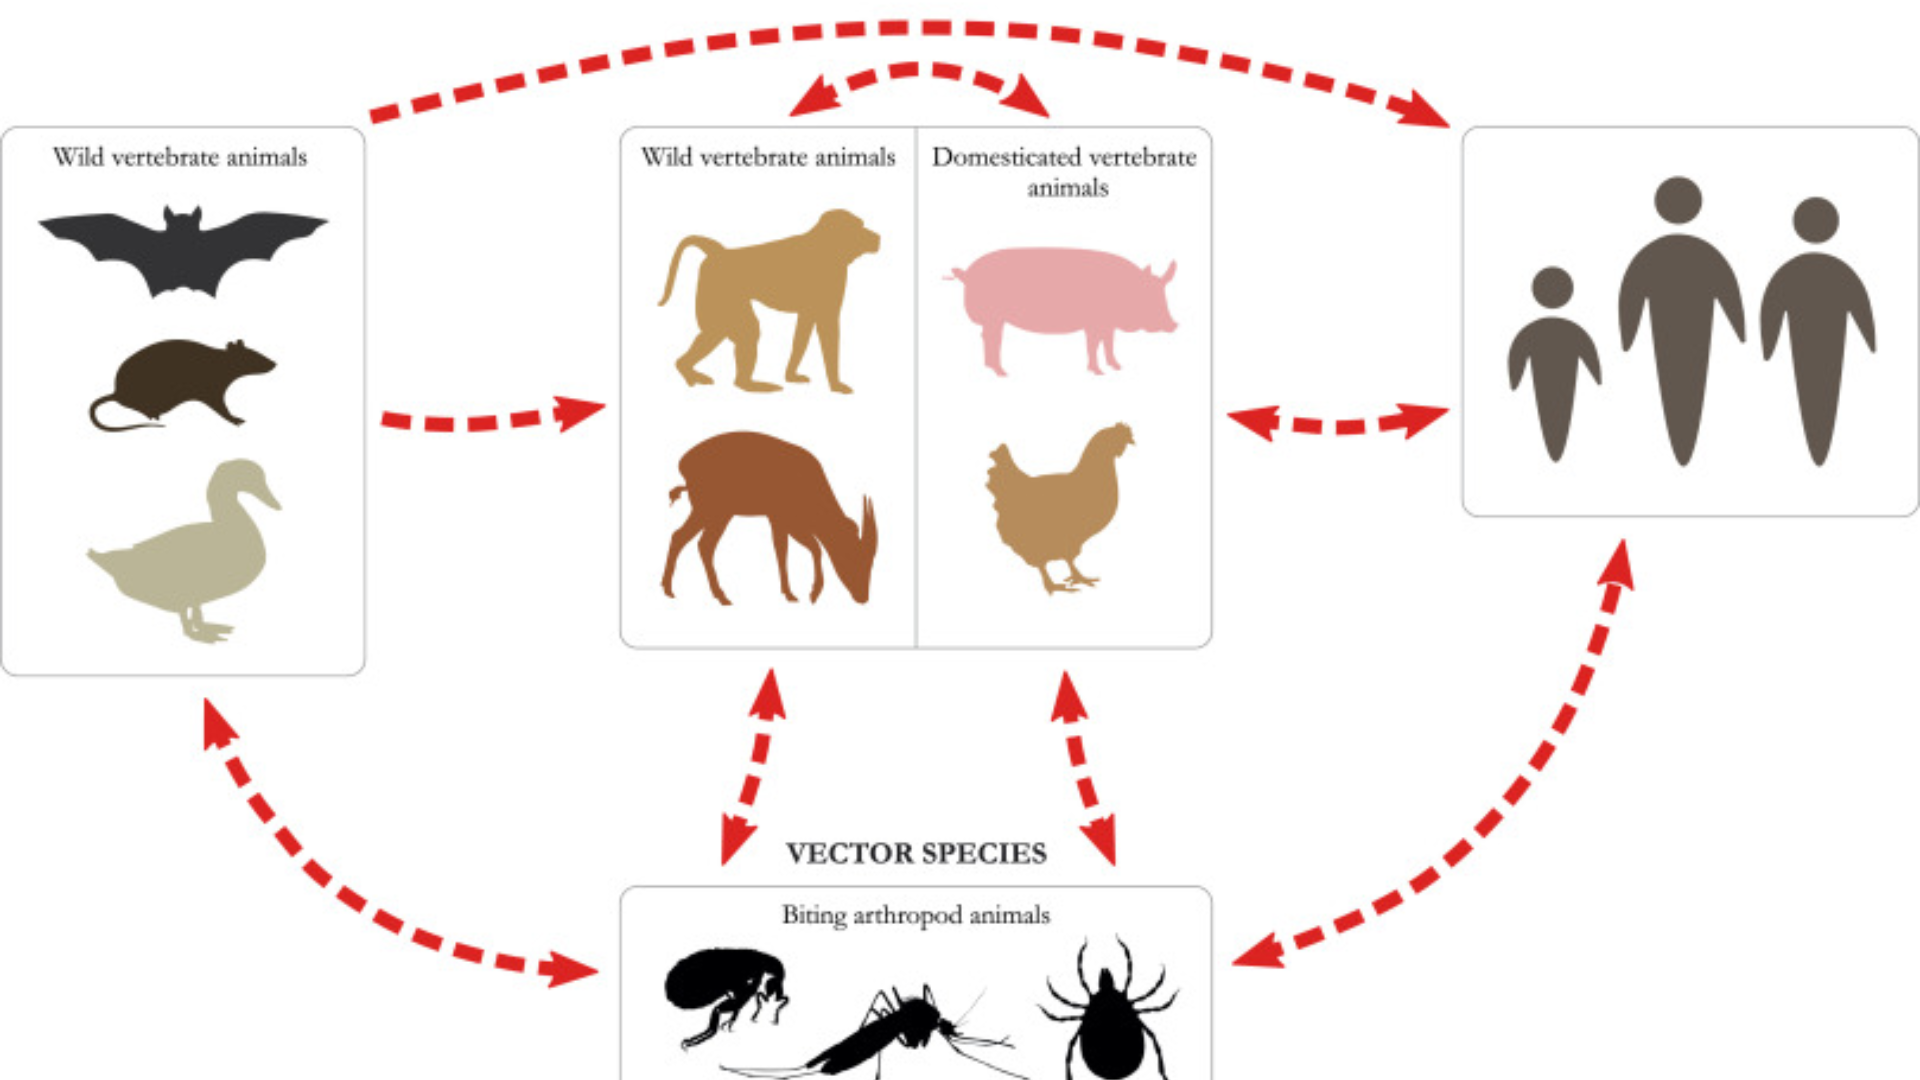 A novel approach may help estimate the spread of wildlife diseases